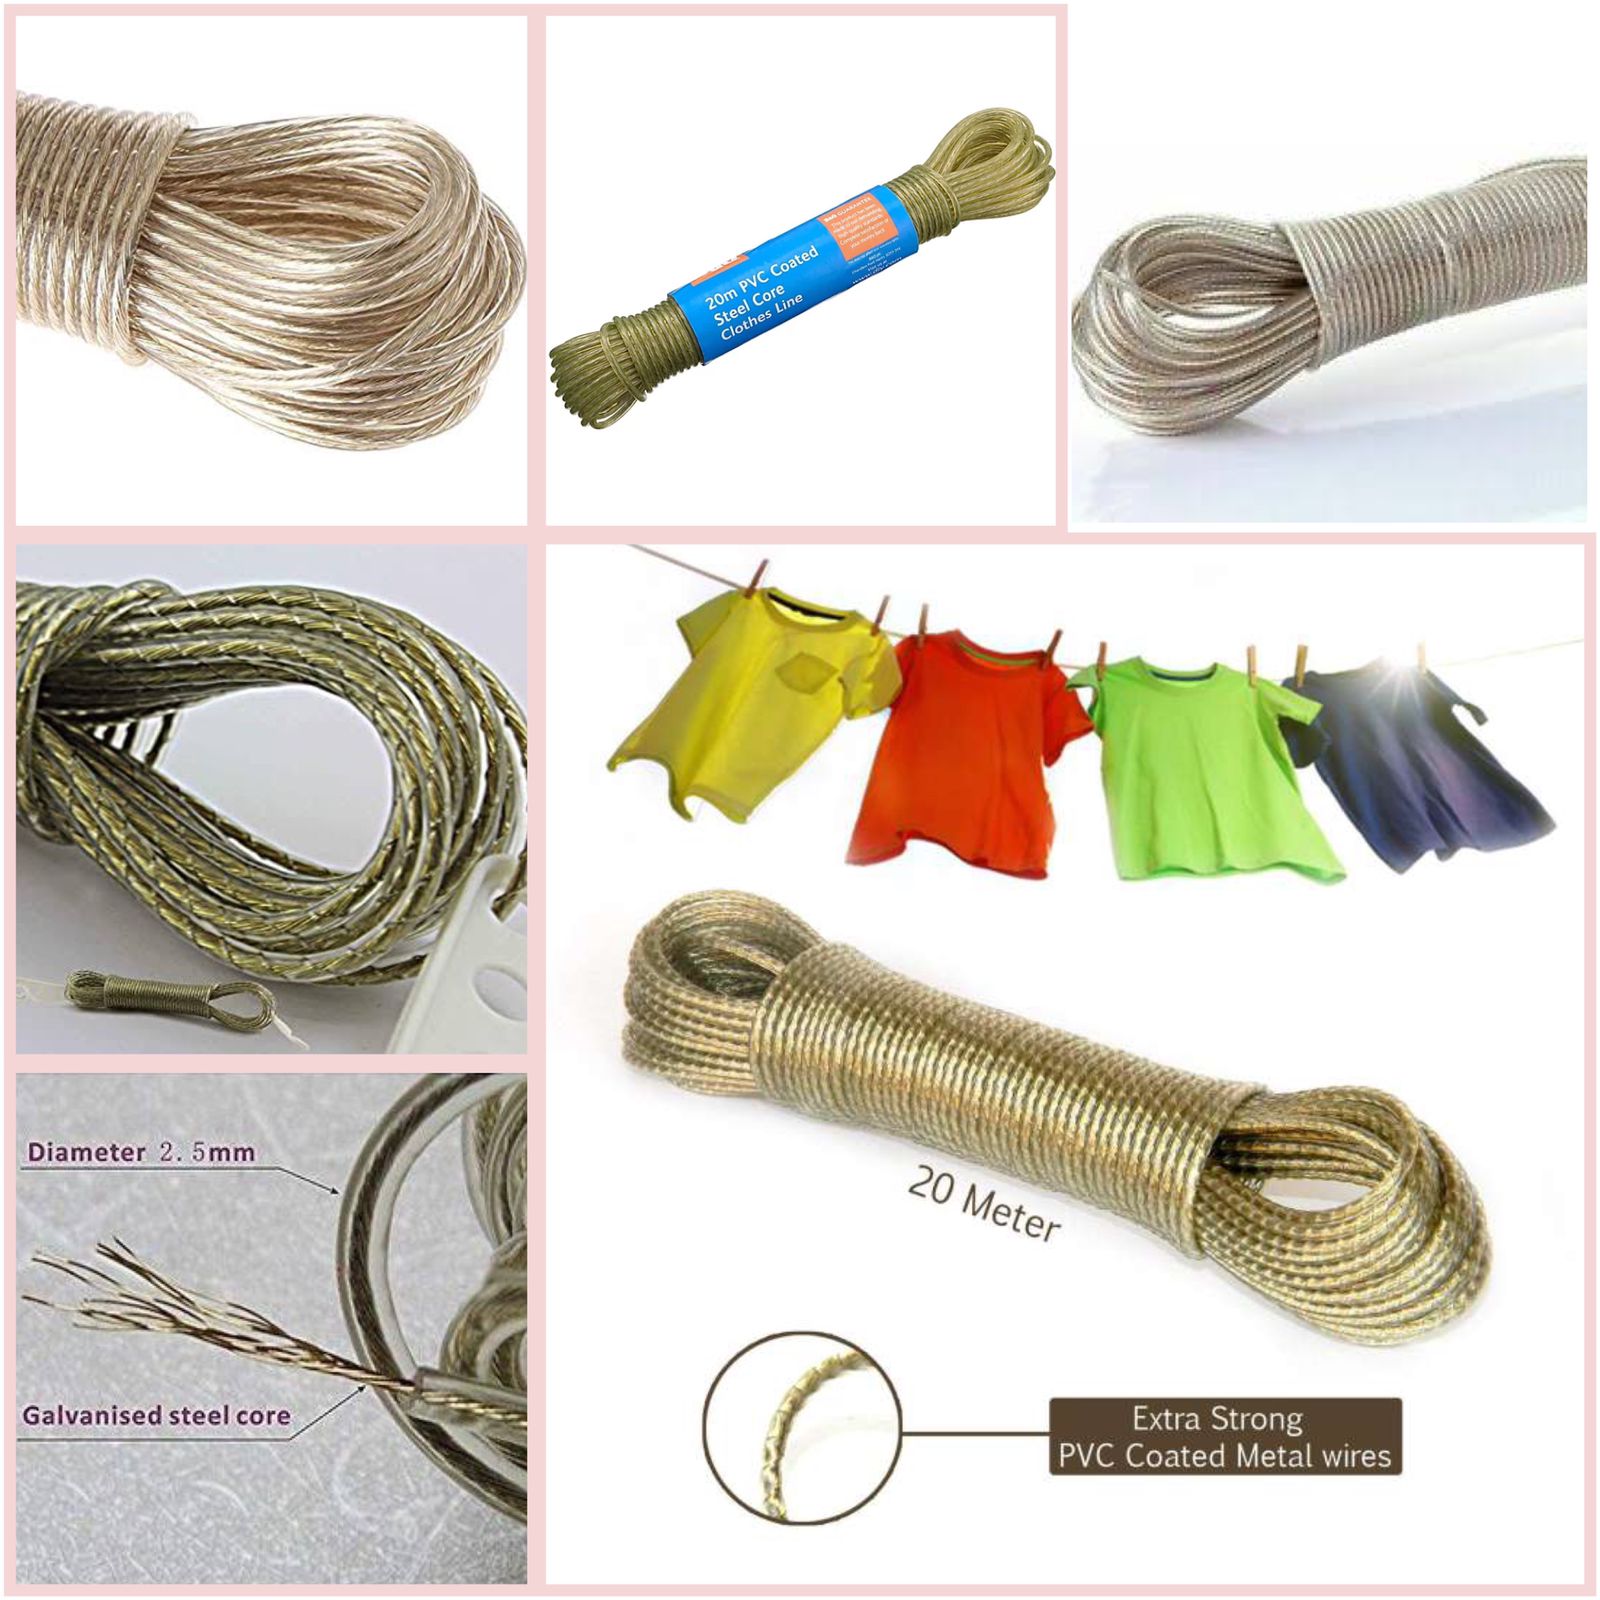 20m Extra Strong PVC Coated Clothesline Metal  Wire In Pakistan